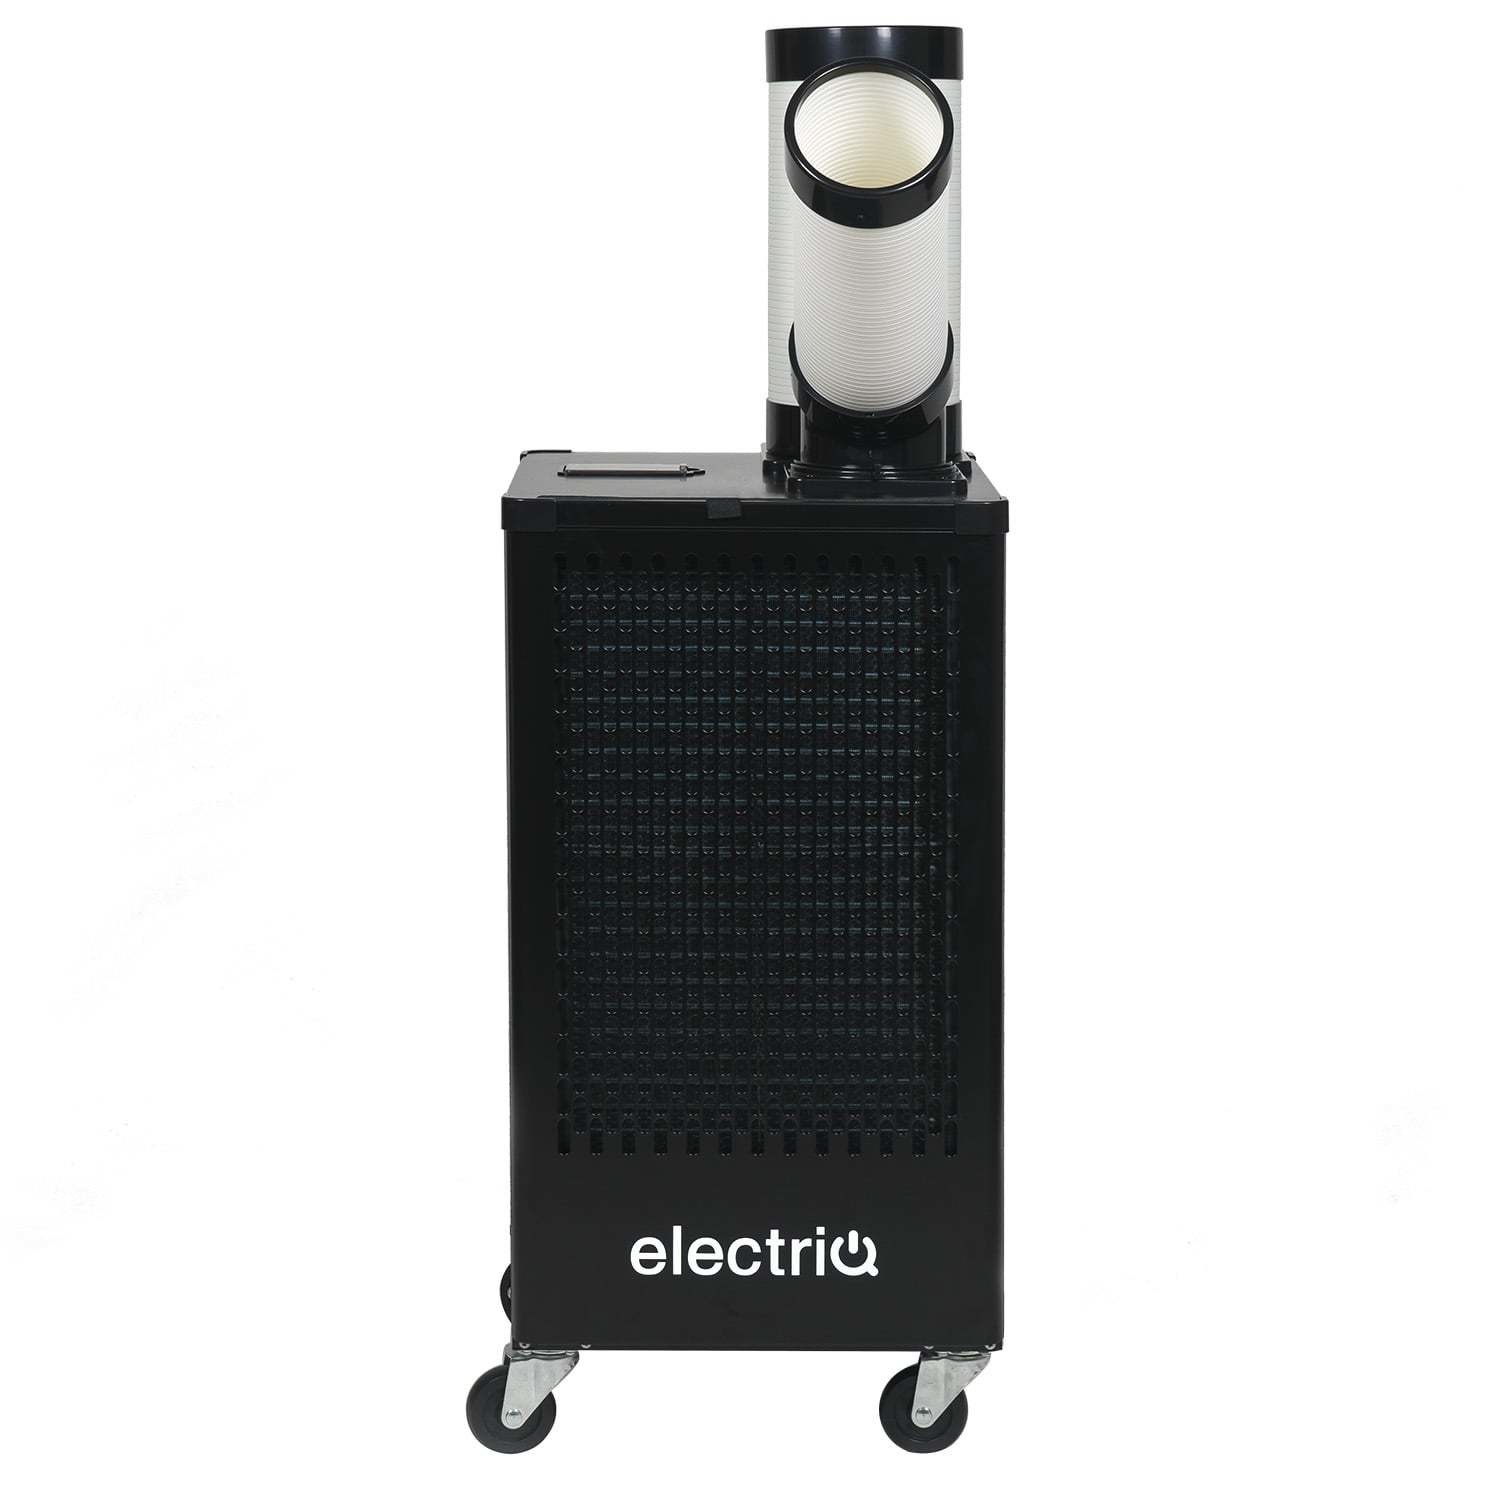 electriQ 9200 BTU Portable Commercial Air Conditioner for up to 26 sqm areas - Heavy Duty Metal Body